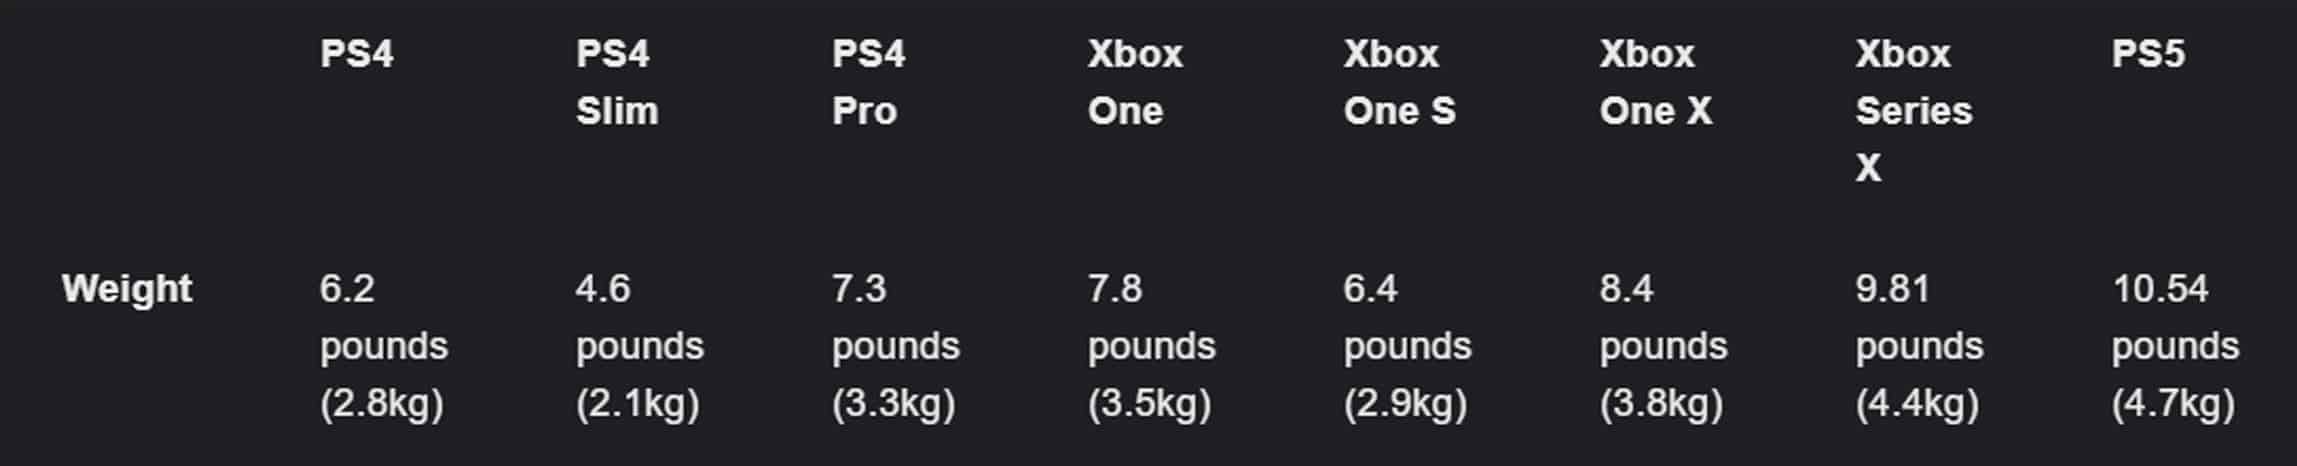 PS5 weight